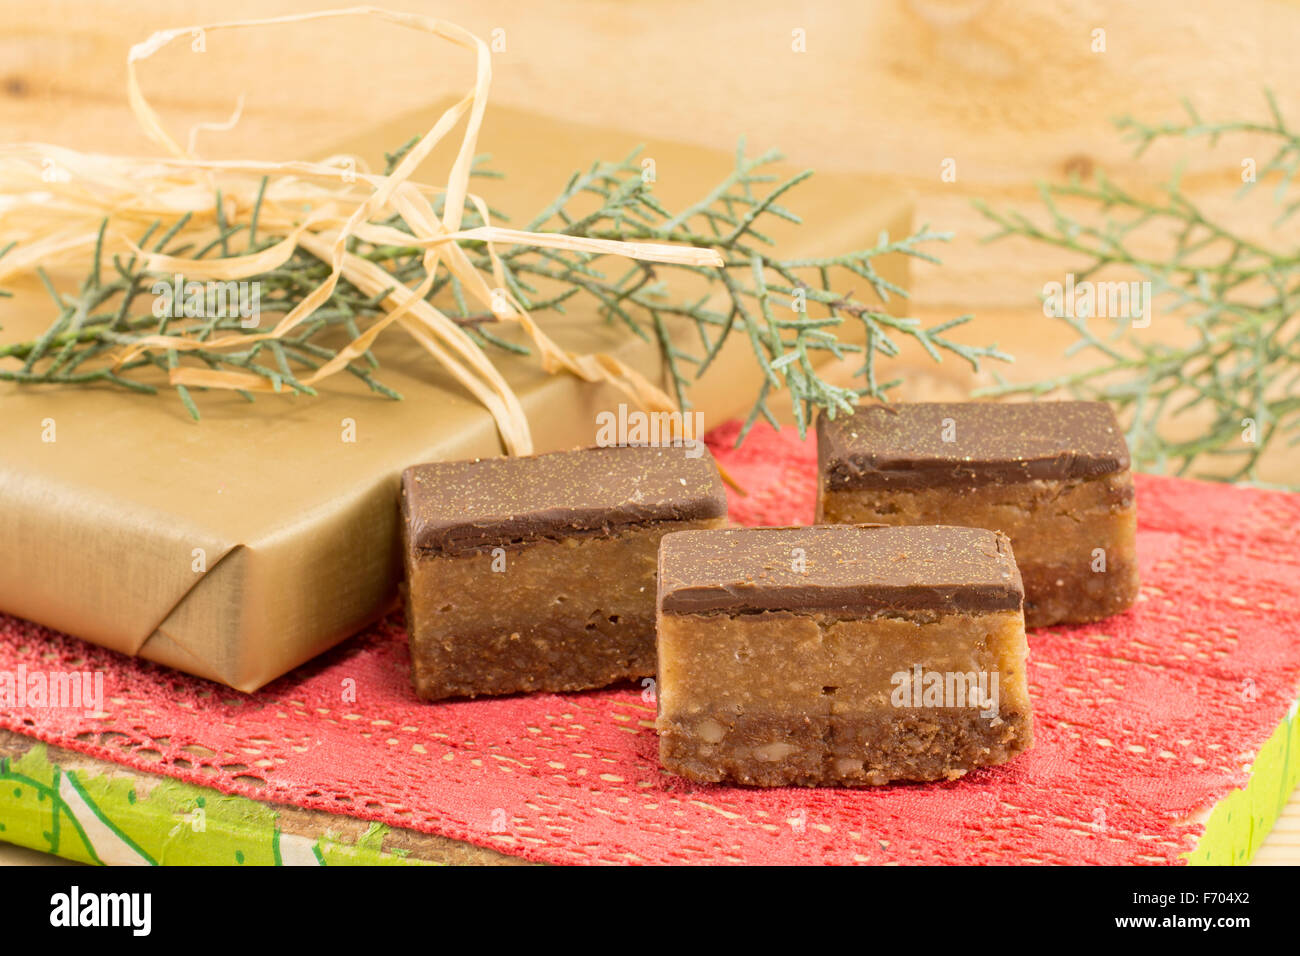 Sweet candies treat and wrapped chocolate on a wooden background Stock Photo